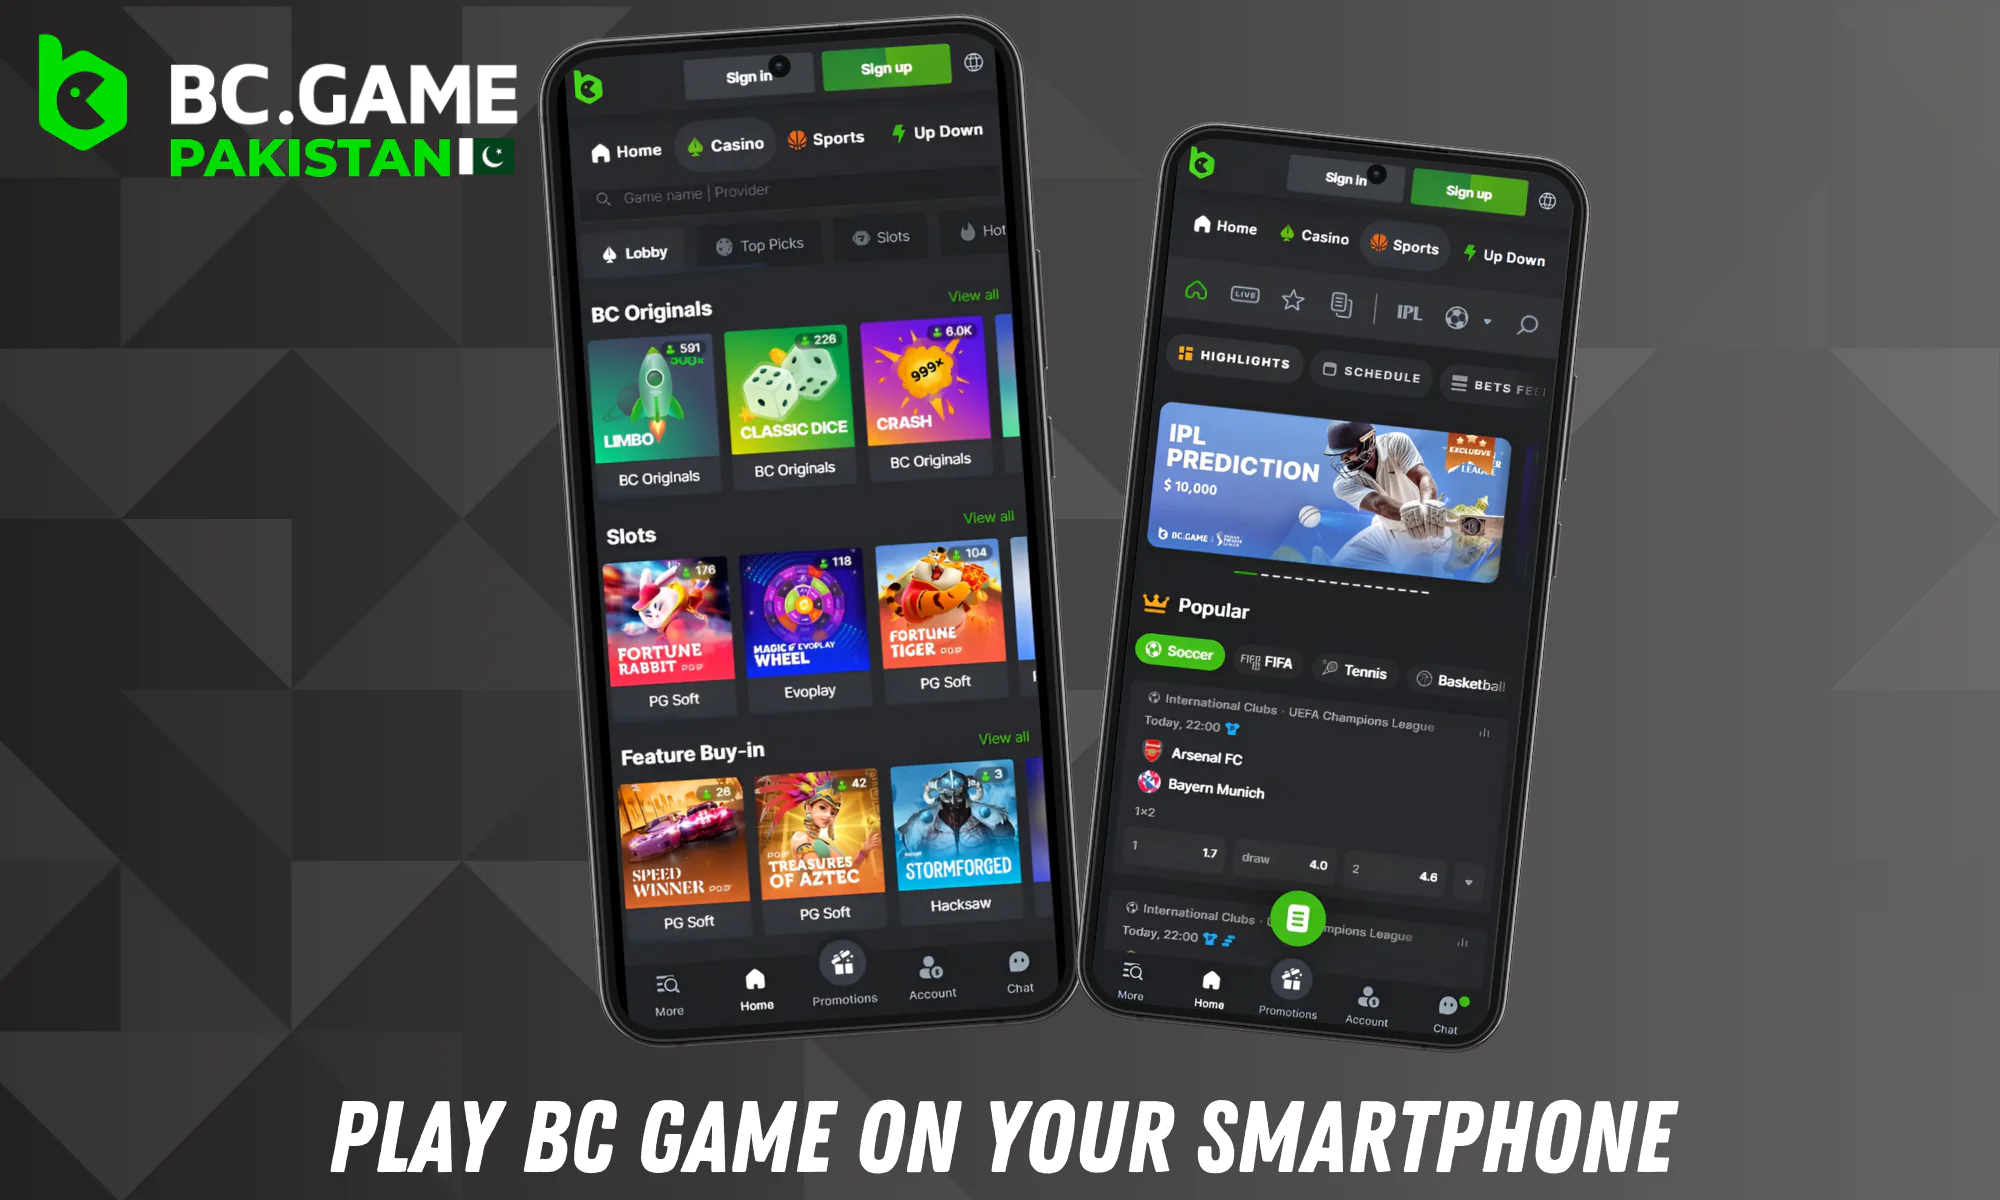 BC Game has an optimized application for those who like to play casino games from their phones